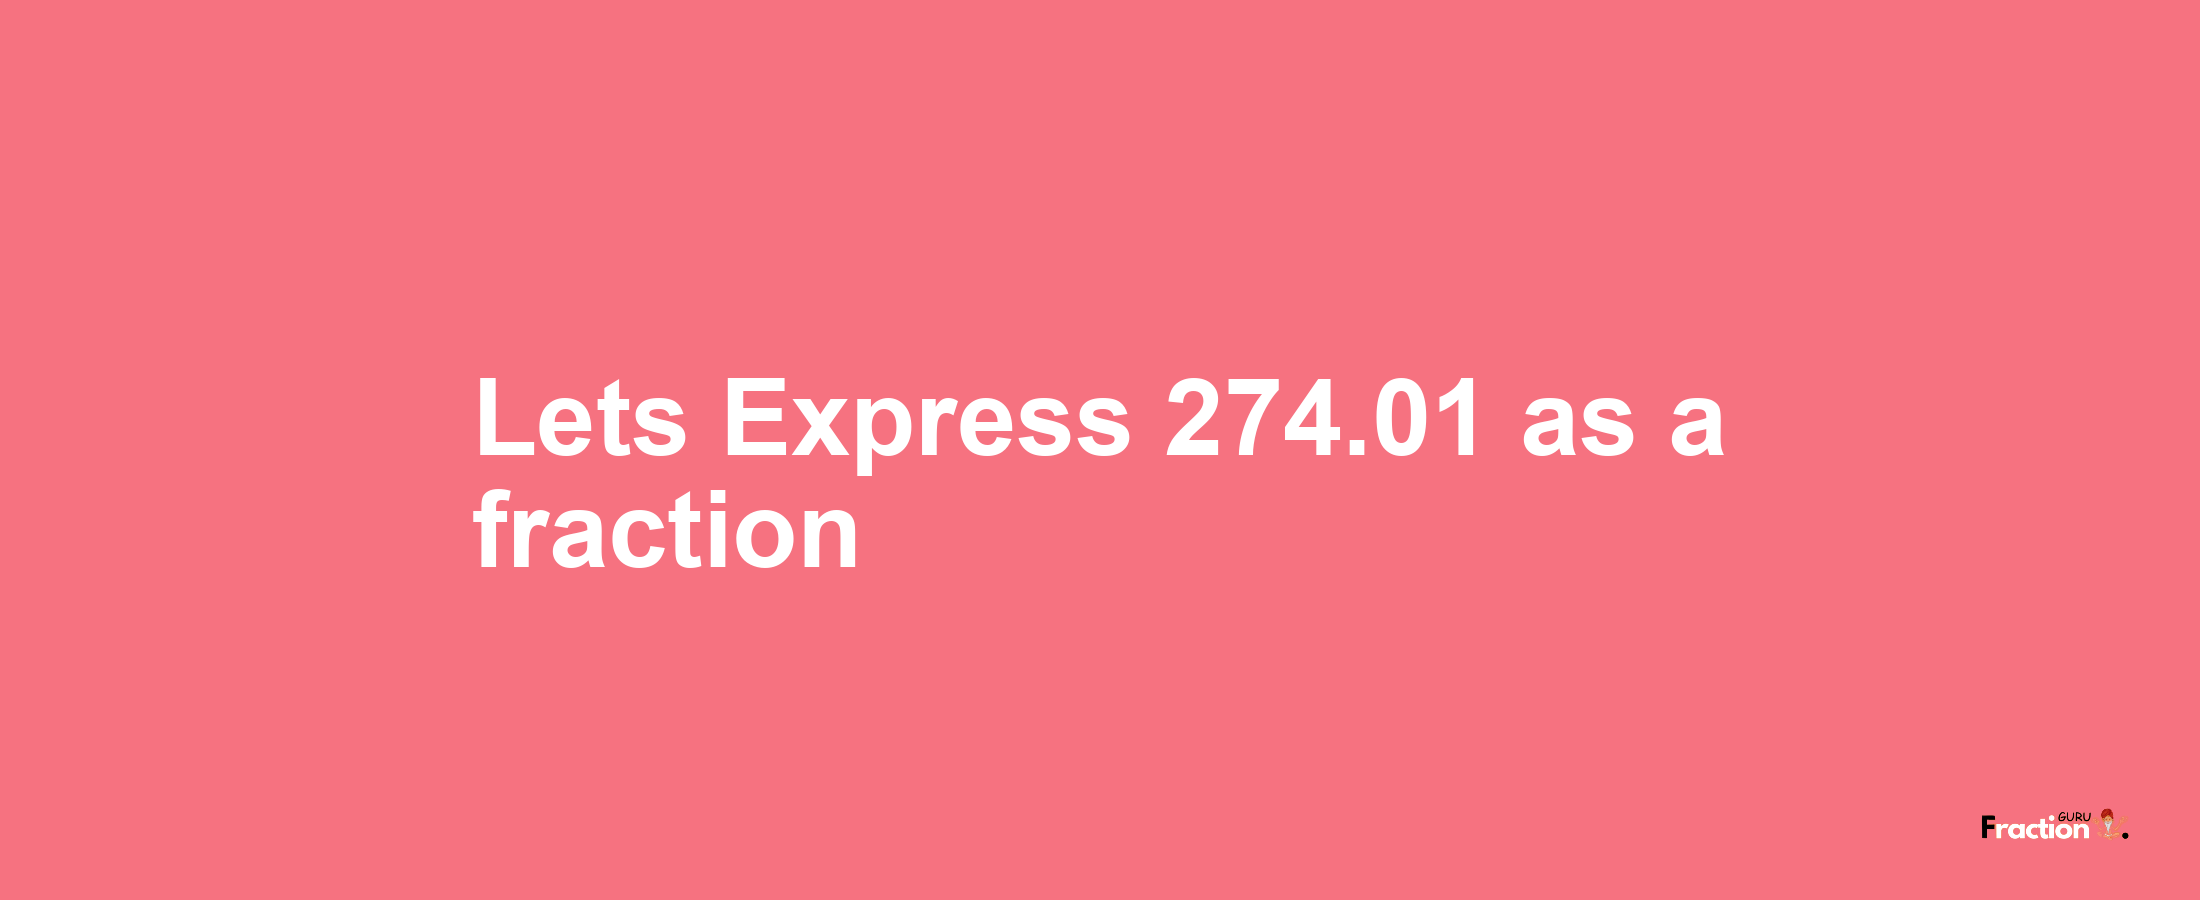 Lets Express 274.01 as afraction